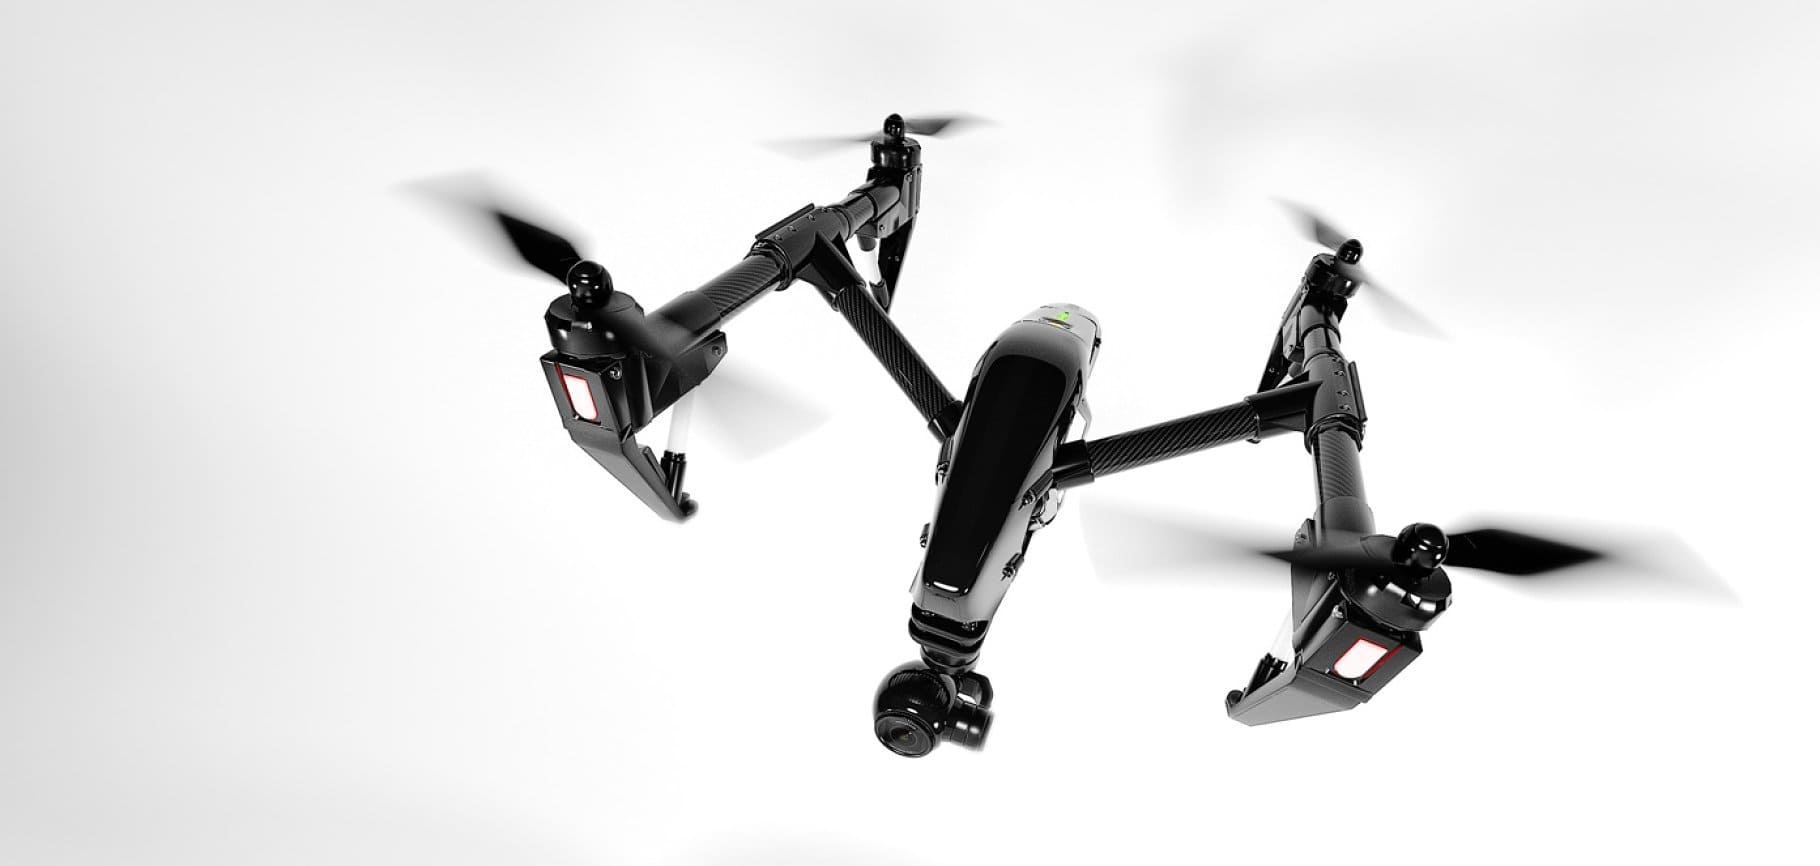 Black quadcopter flying in the air on a white background.